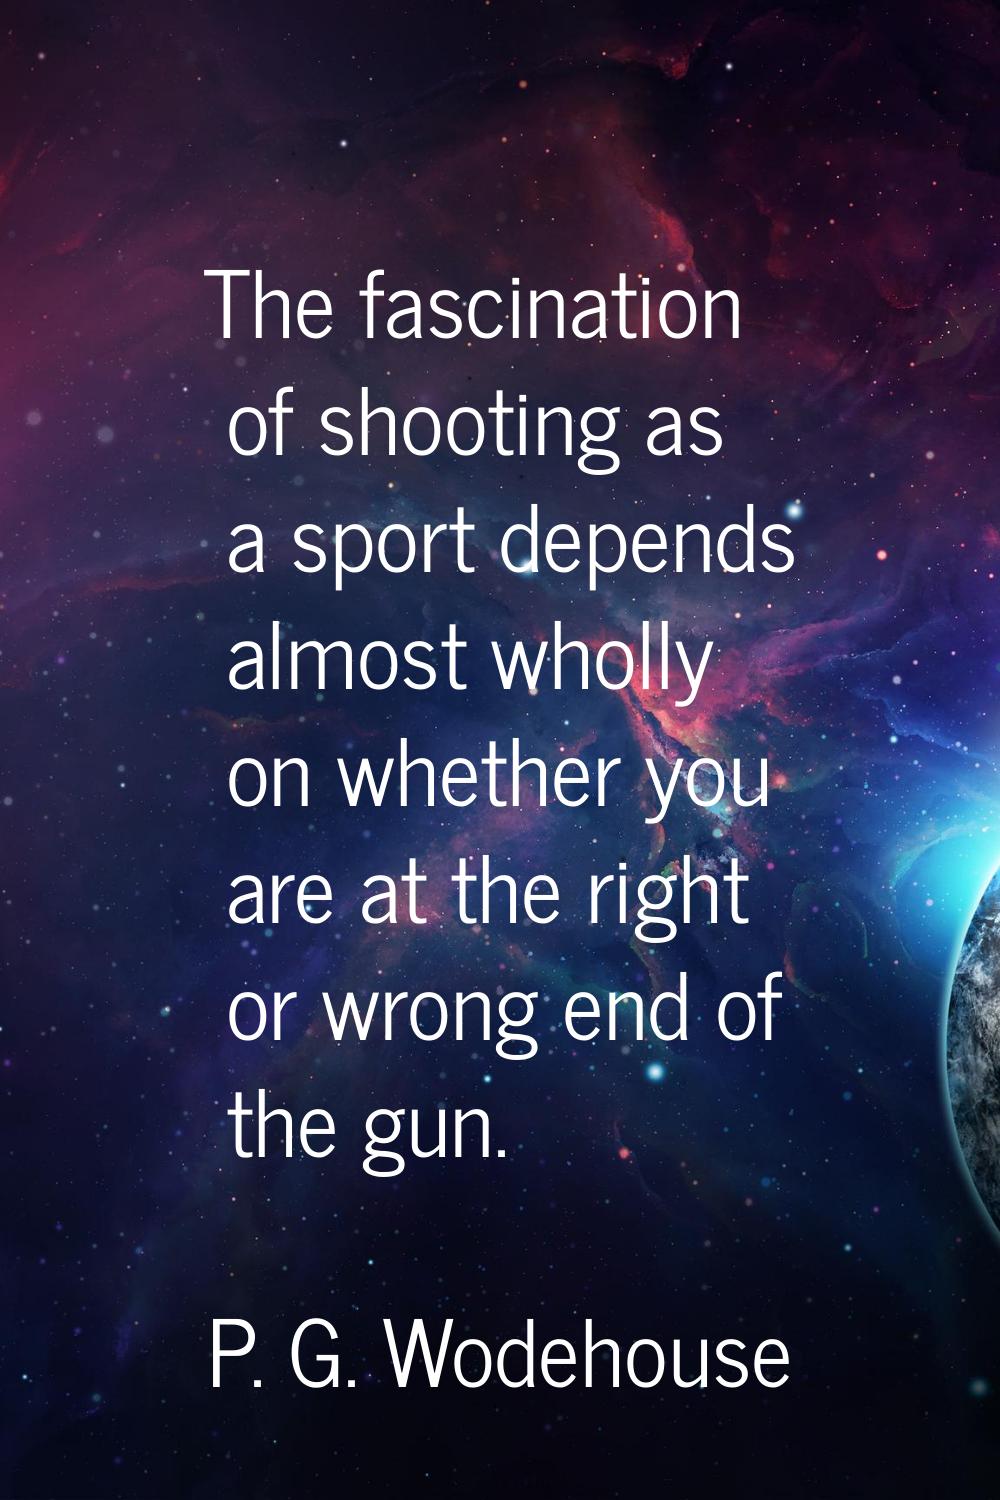 The fascination of shooting as a sport depends almost wholly on whether you are at the right or wro